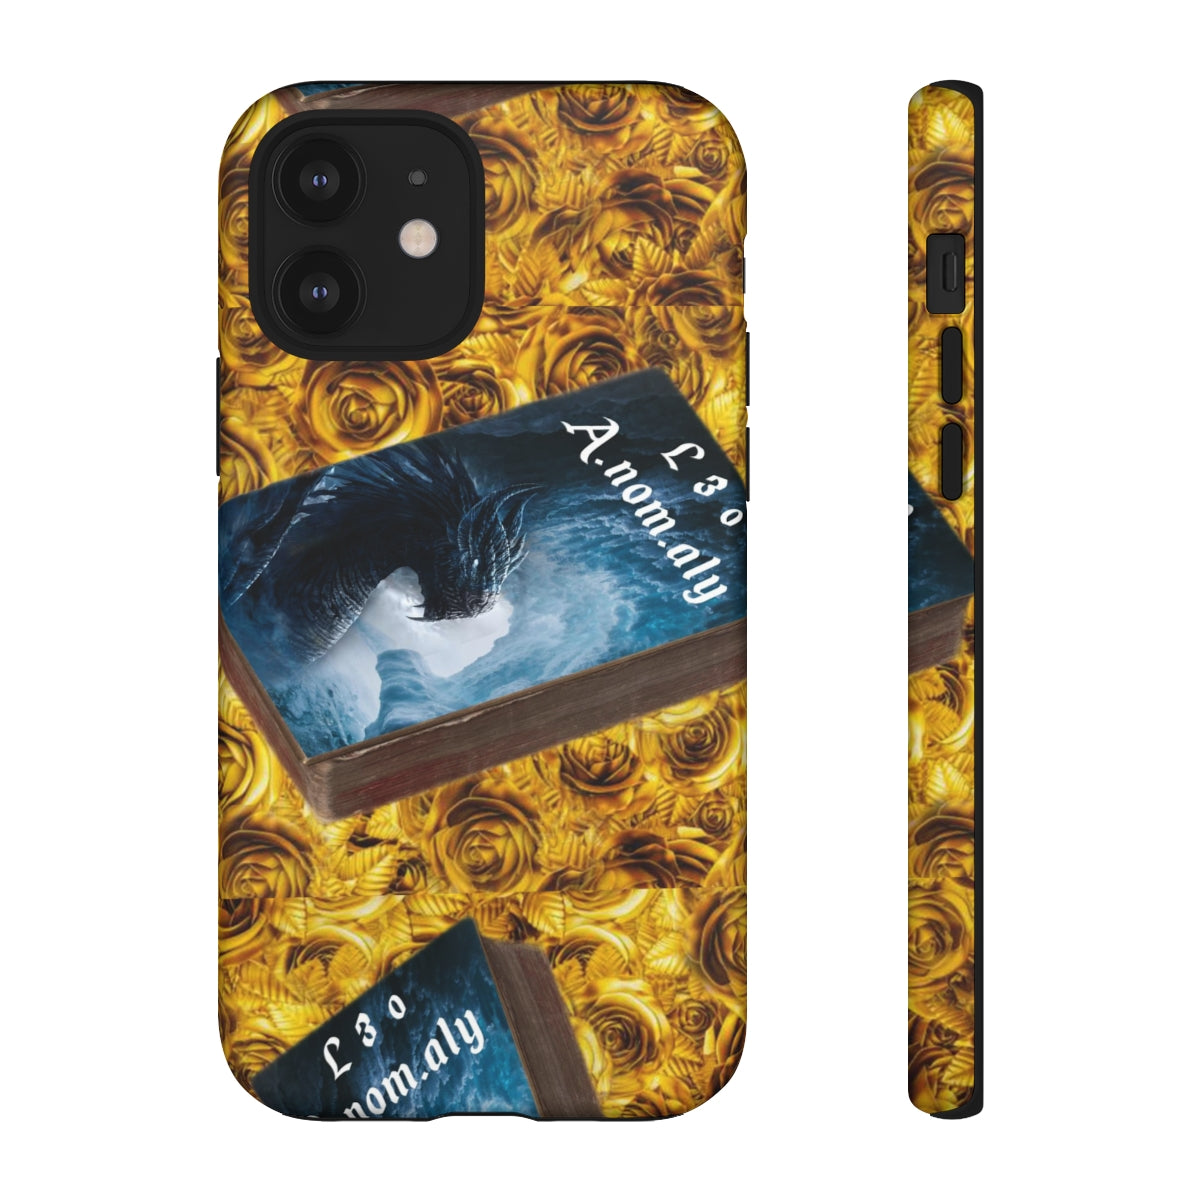 An.nom.aly Phone Cases